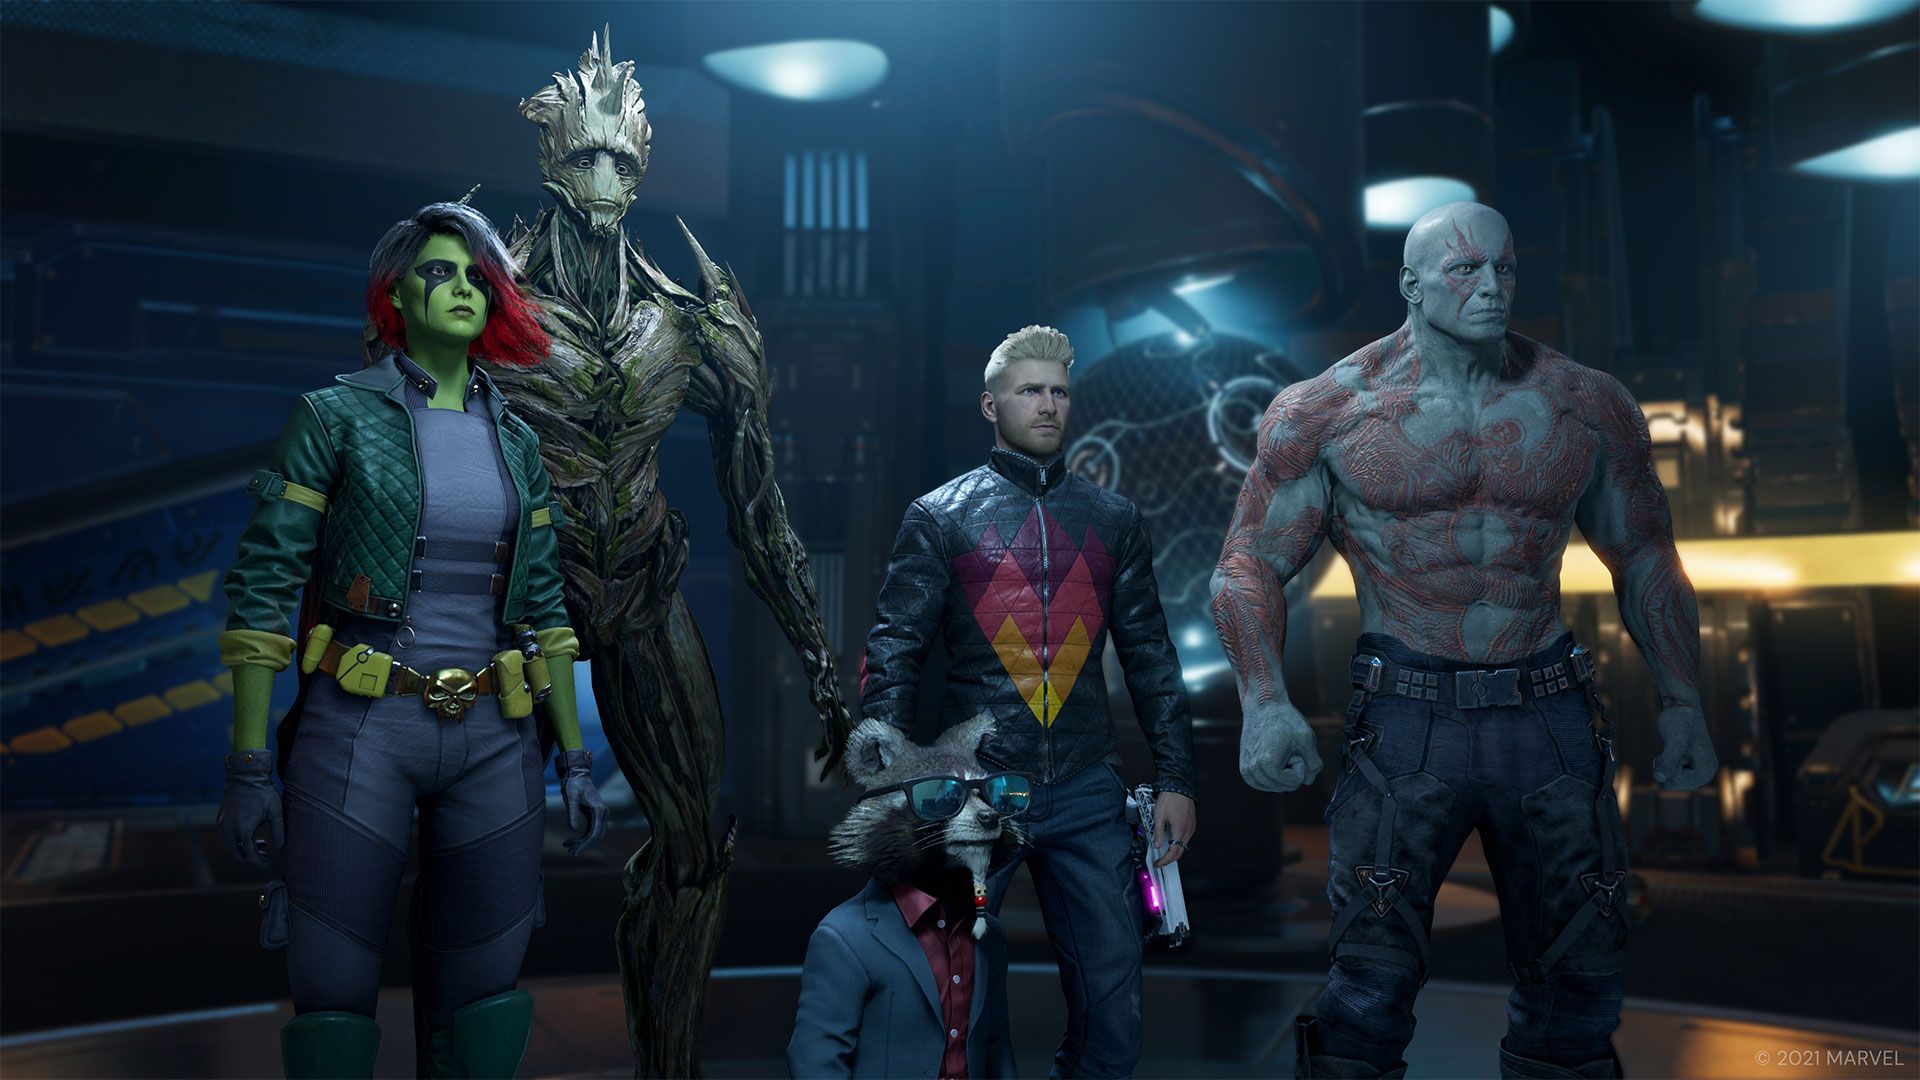 The Guardians of the Galaxy show off alternate costumes in the upcoming game. 